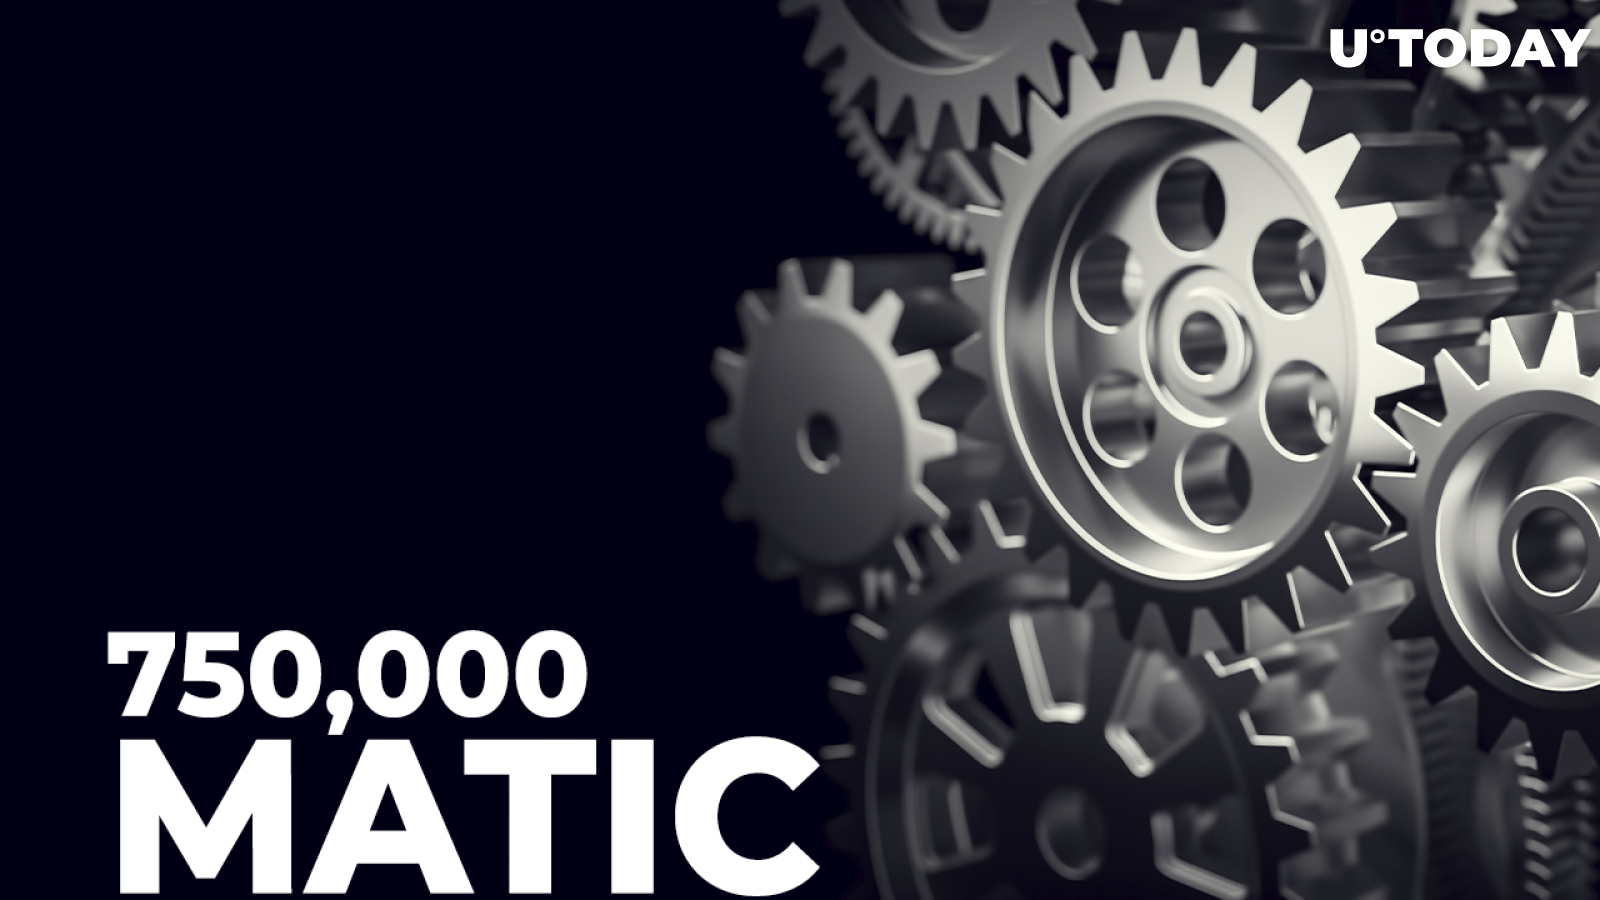 More Than 750,000 MATIC Have Been Burned Since Launch of Burn Mechanism